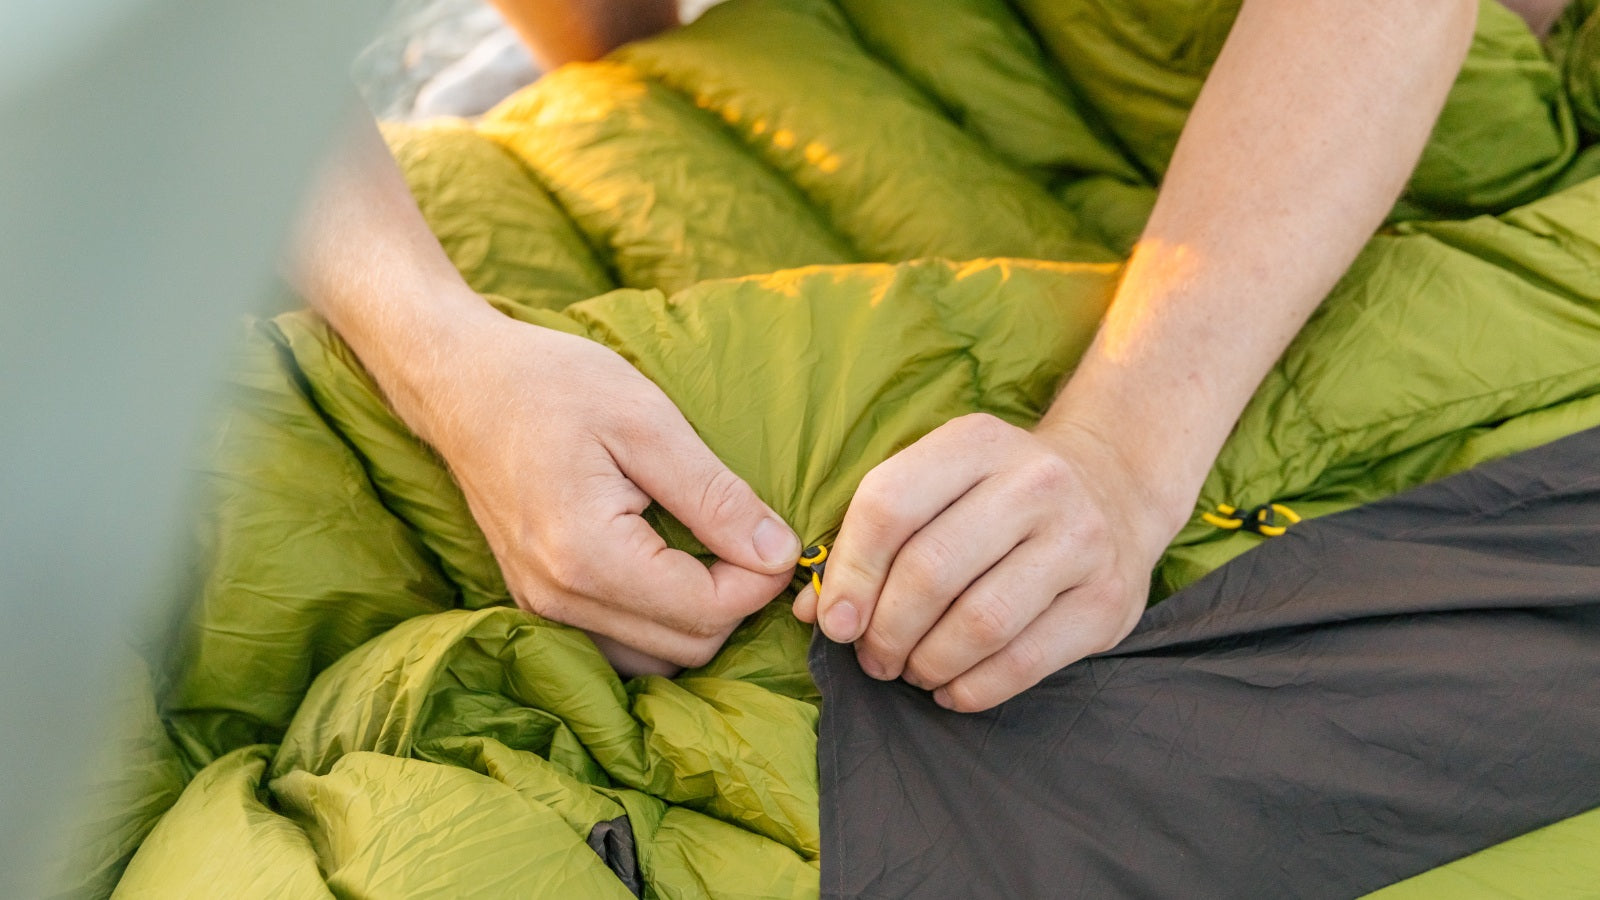 By replacing the zippers with hooks & loops, you can now attach the quilt to the sheet in more ways than before. Take a full tour of the Zenbivy Light Bed.